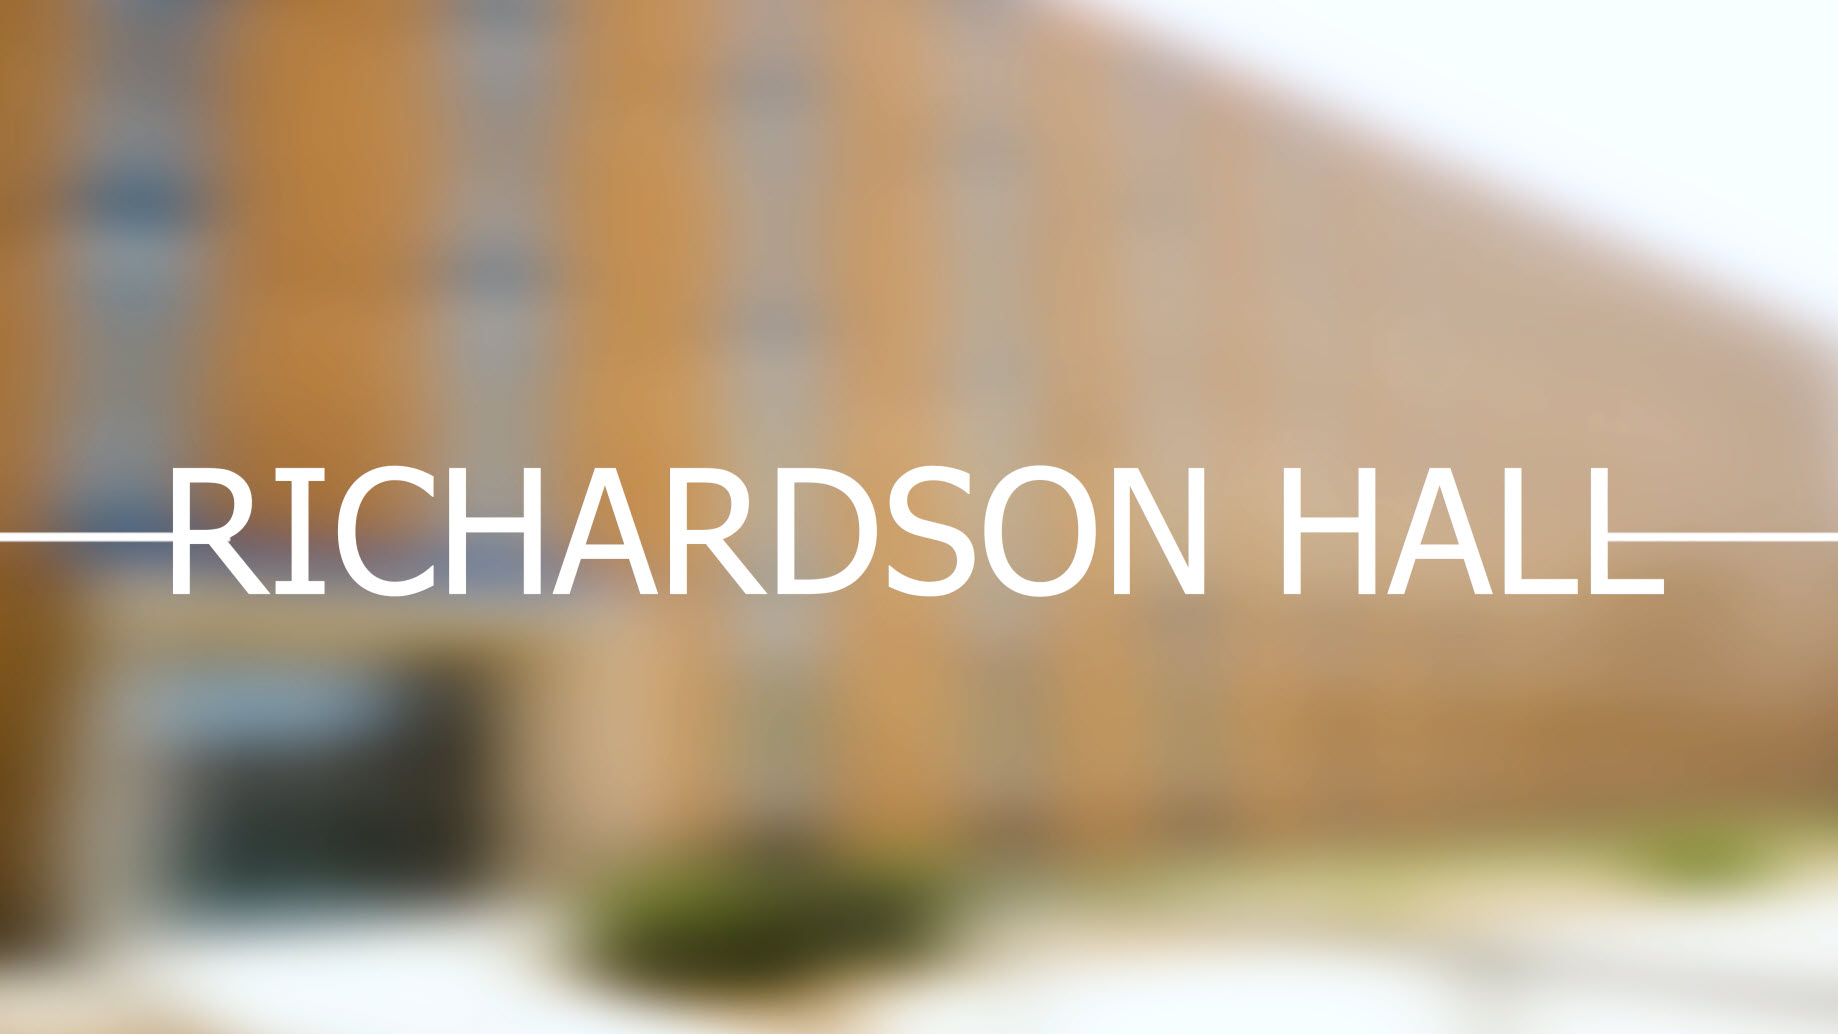 Richardson Hall primarily houses upperclassmen and is the largest residence hall on campus. It is a co-ed hall, located on the eastern side of campus.